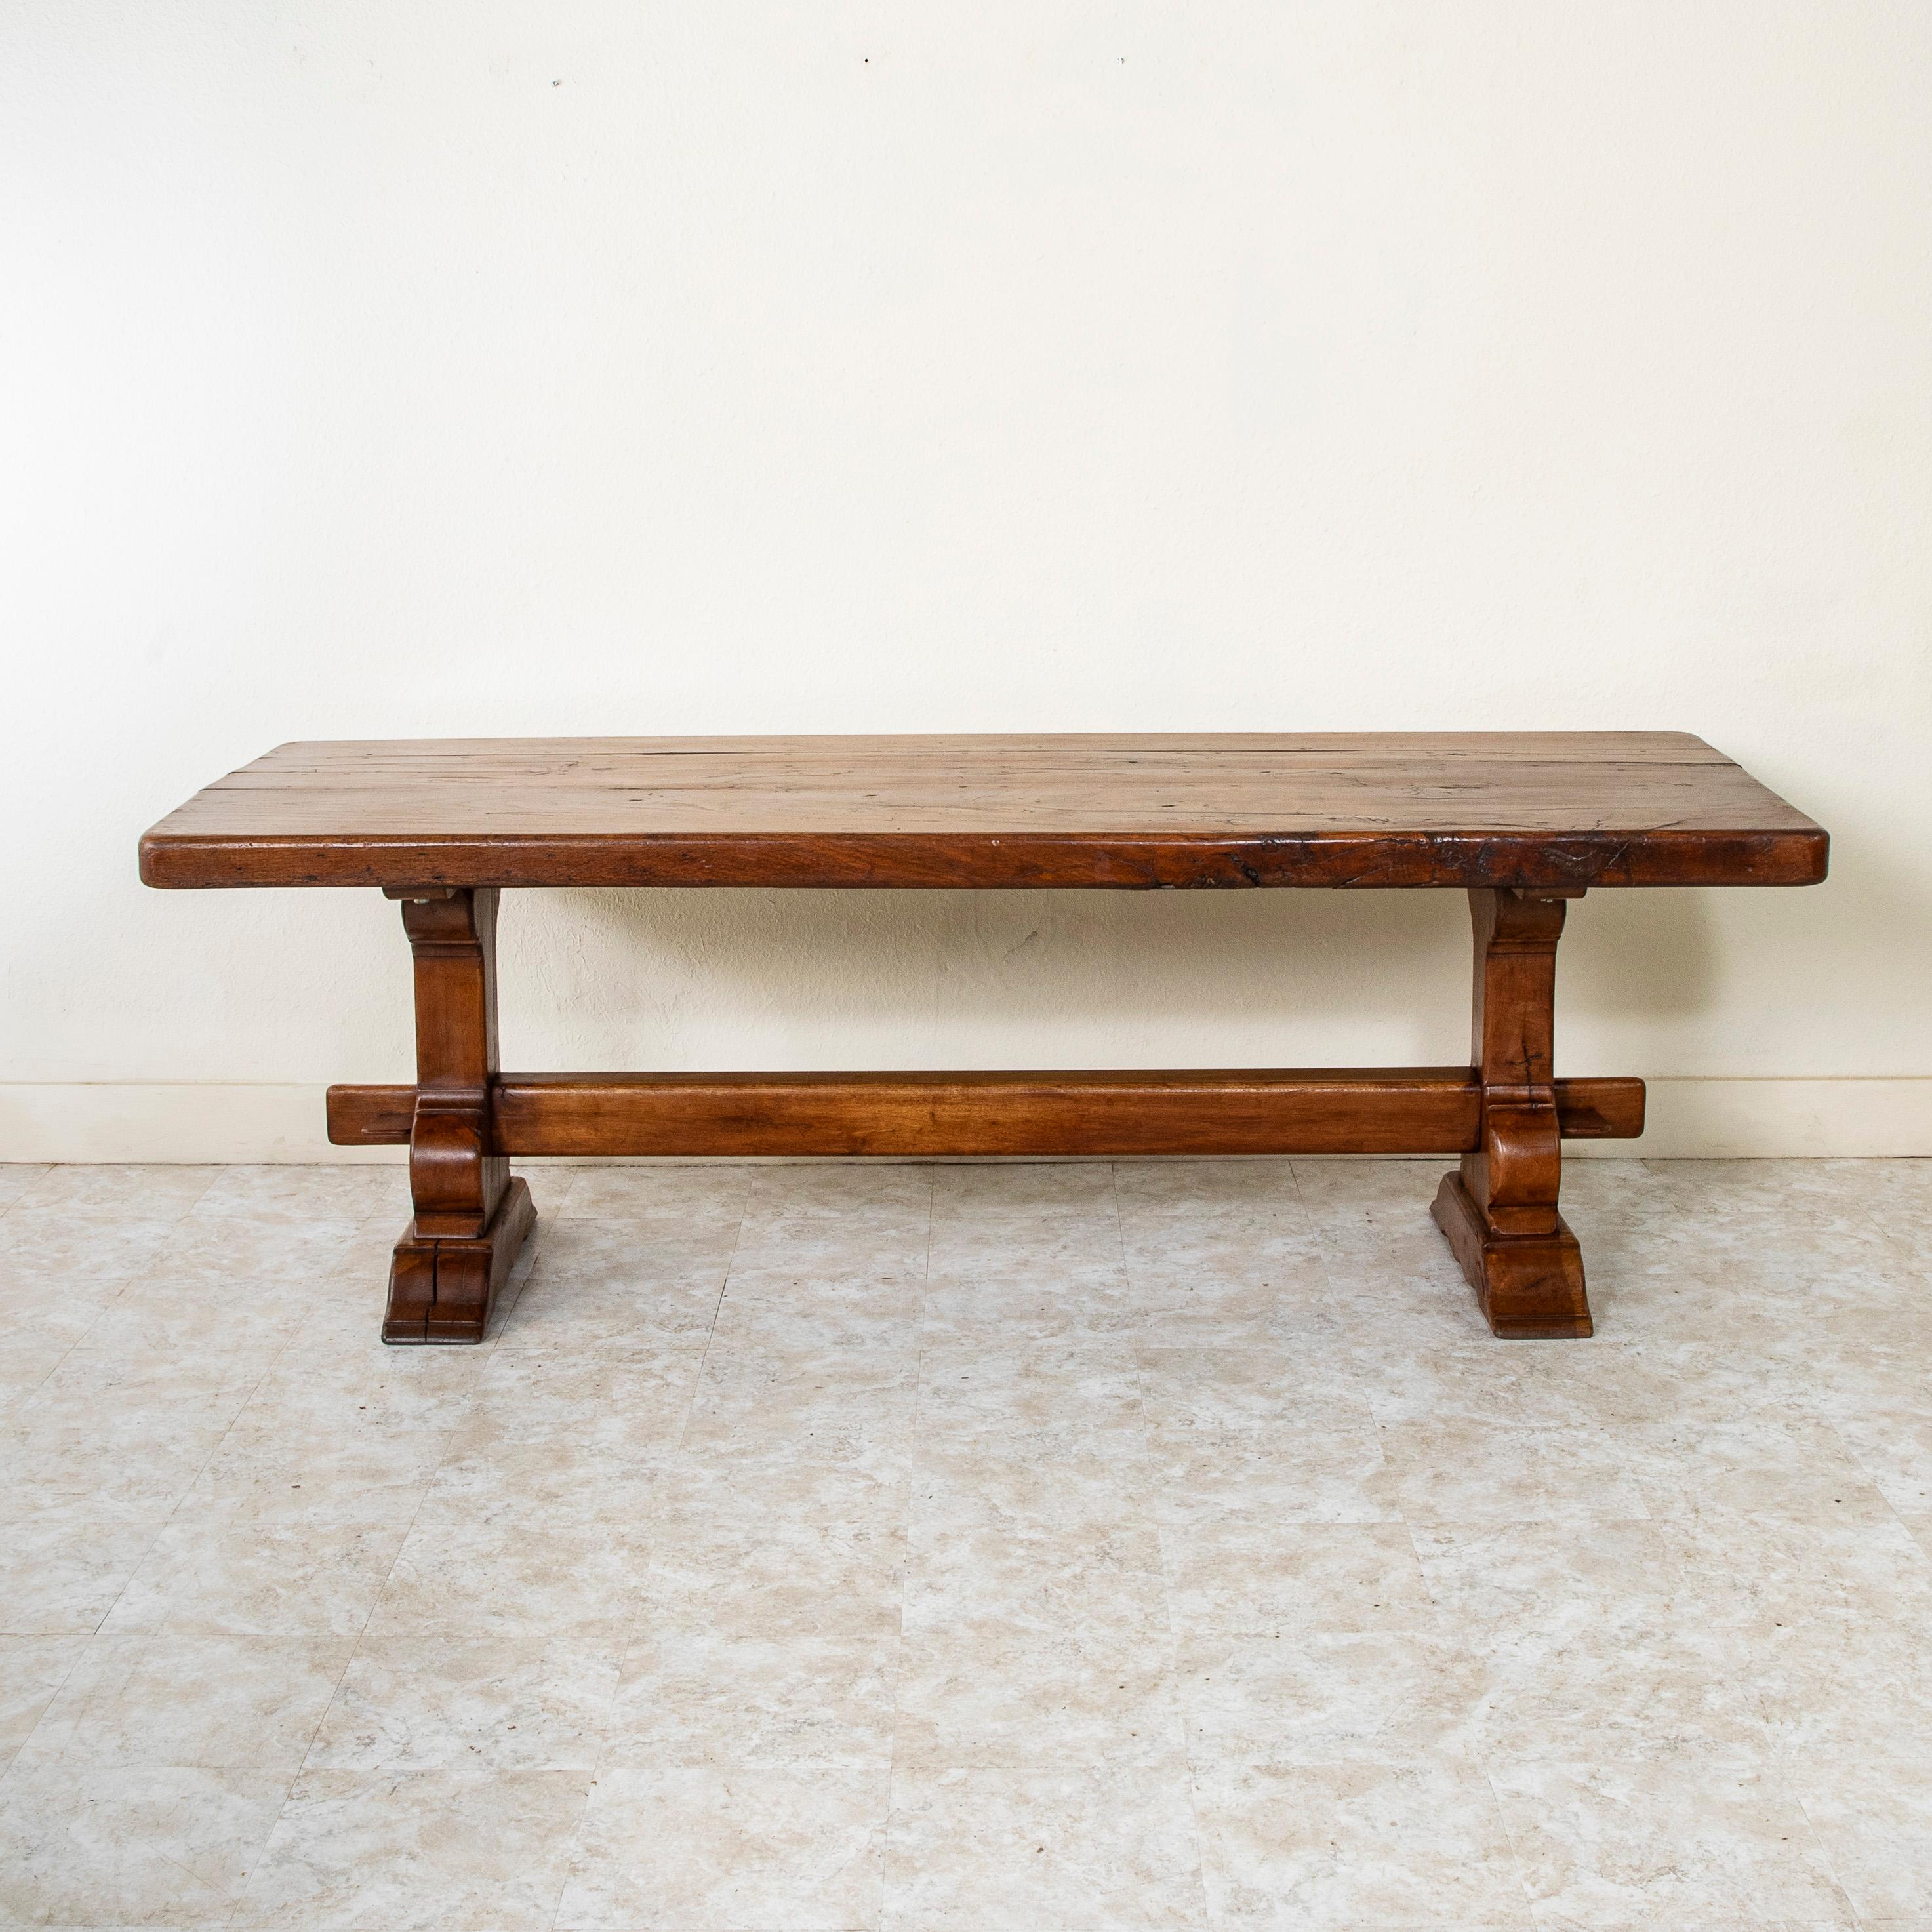 Found in the region of Normandy, France, this large artisan-made oak monastery table or dining table from the early twentieth century features an impressive 3.25 inch thick hand pegged top constructed of four planks of wood. The table rests on a